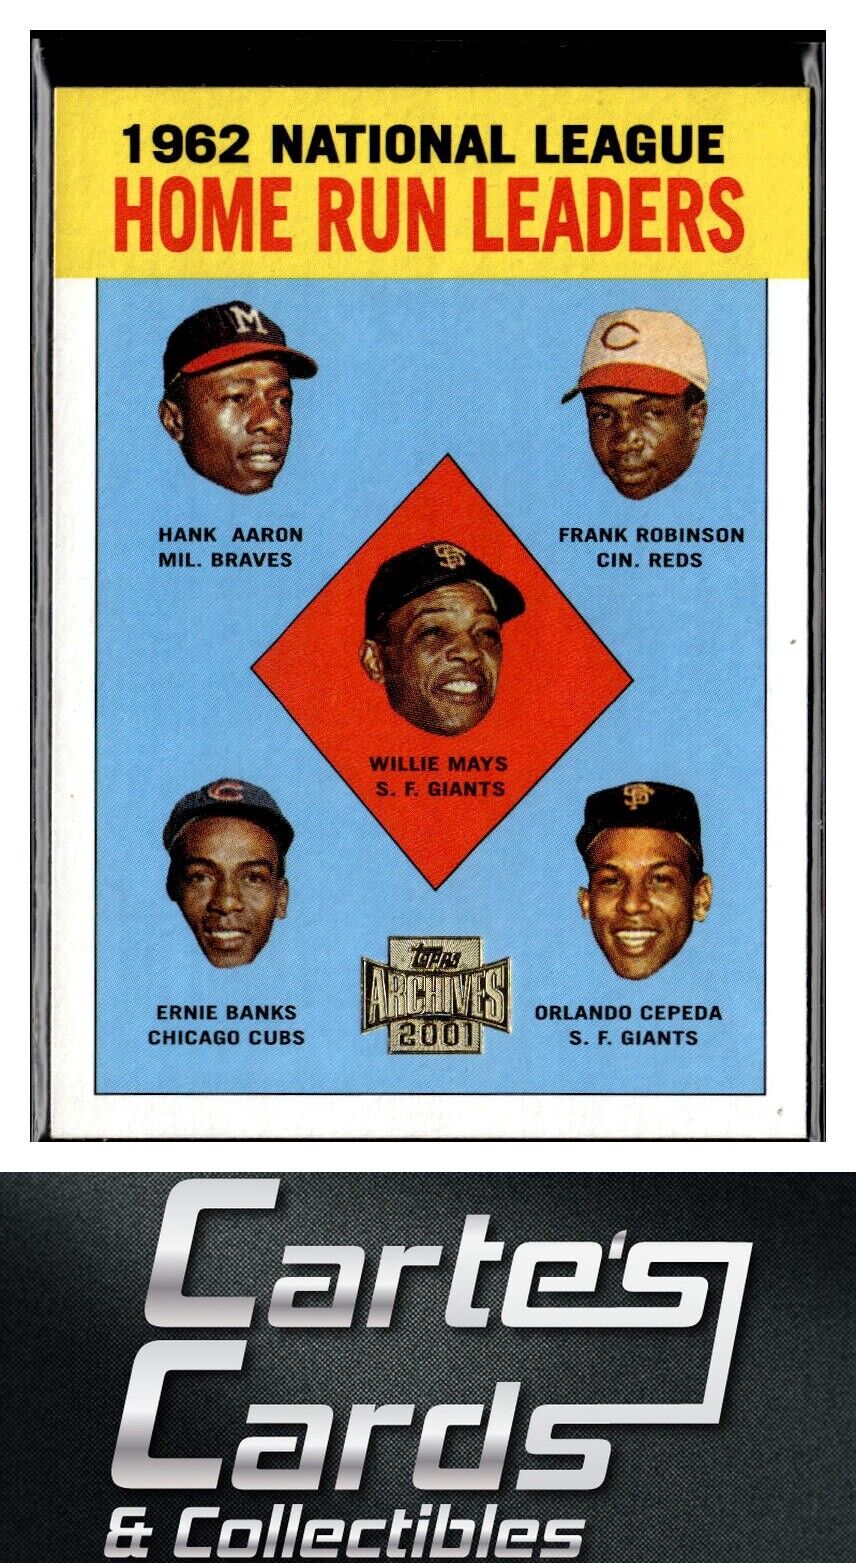 Willie Mays Hank Aaron Robinson Banks Cepeda 2001 Topps Archives #211 HR Leaders